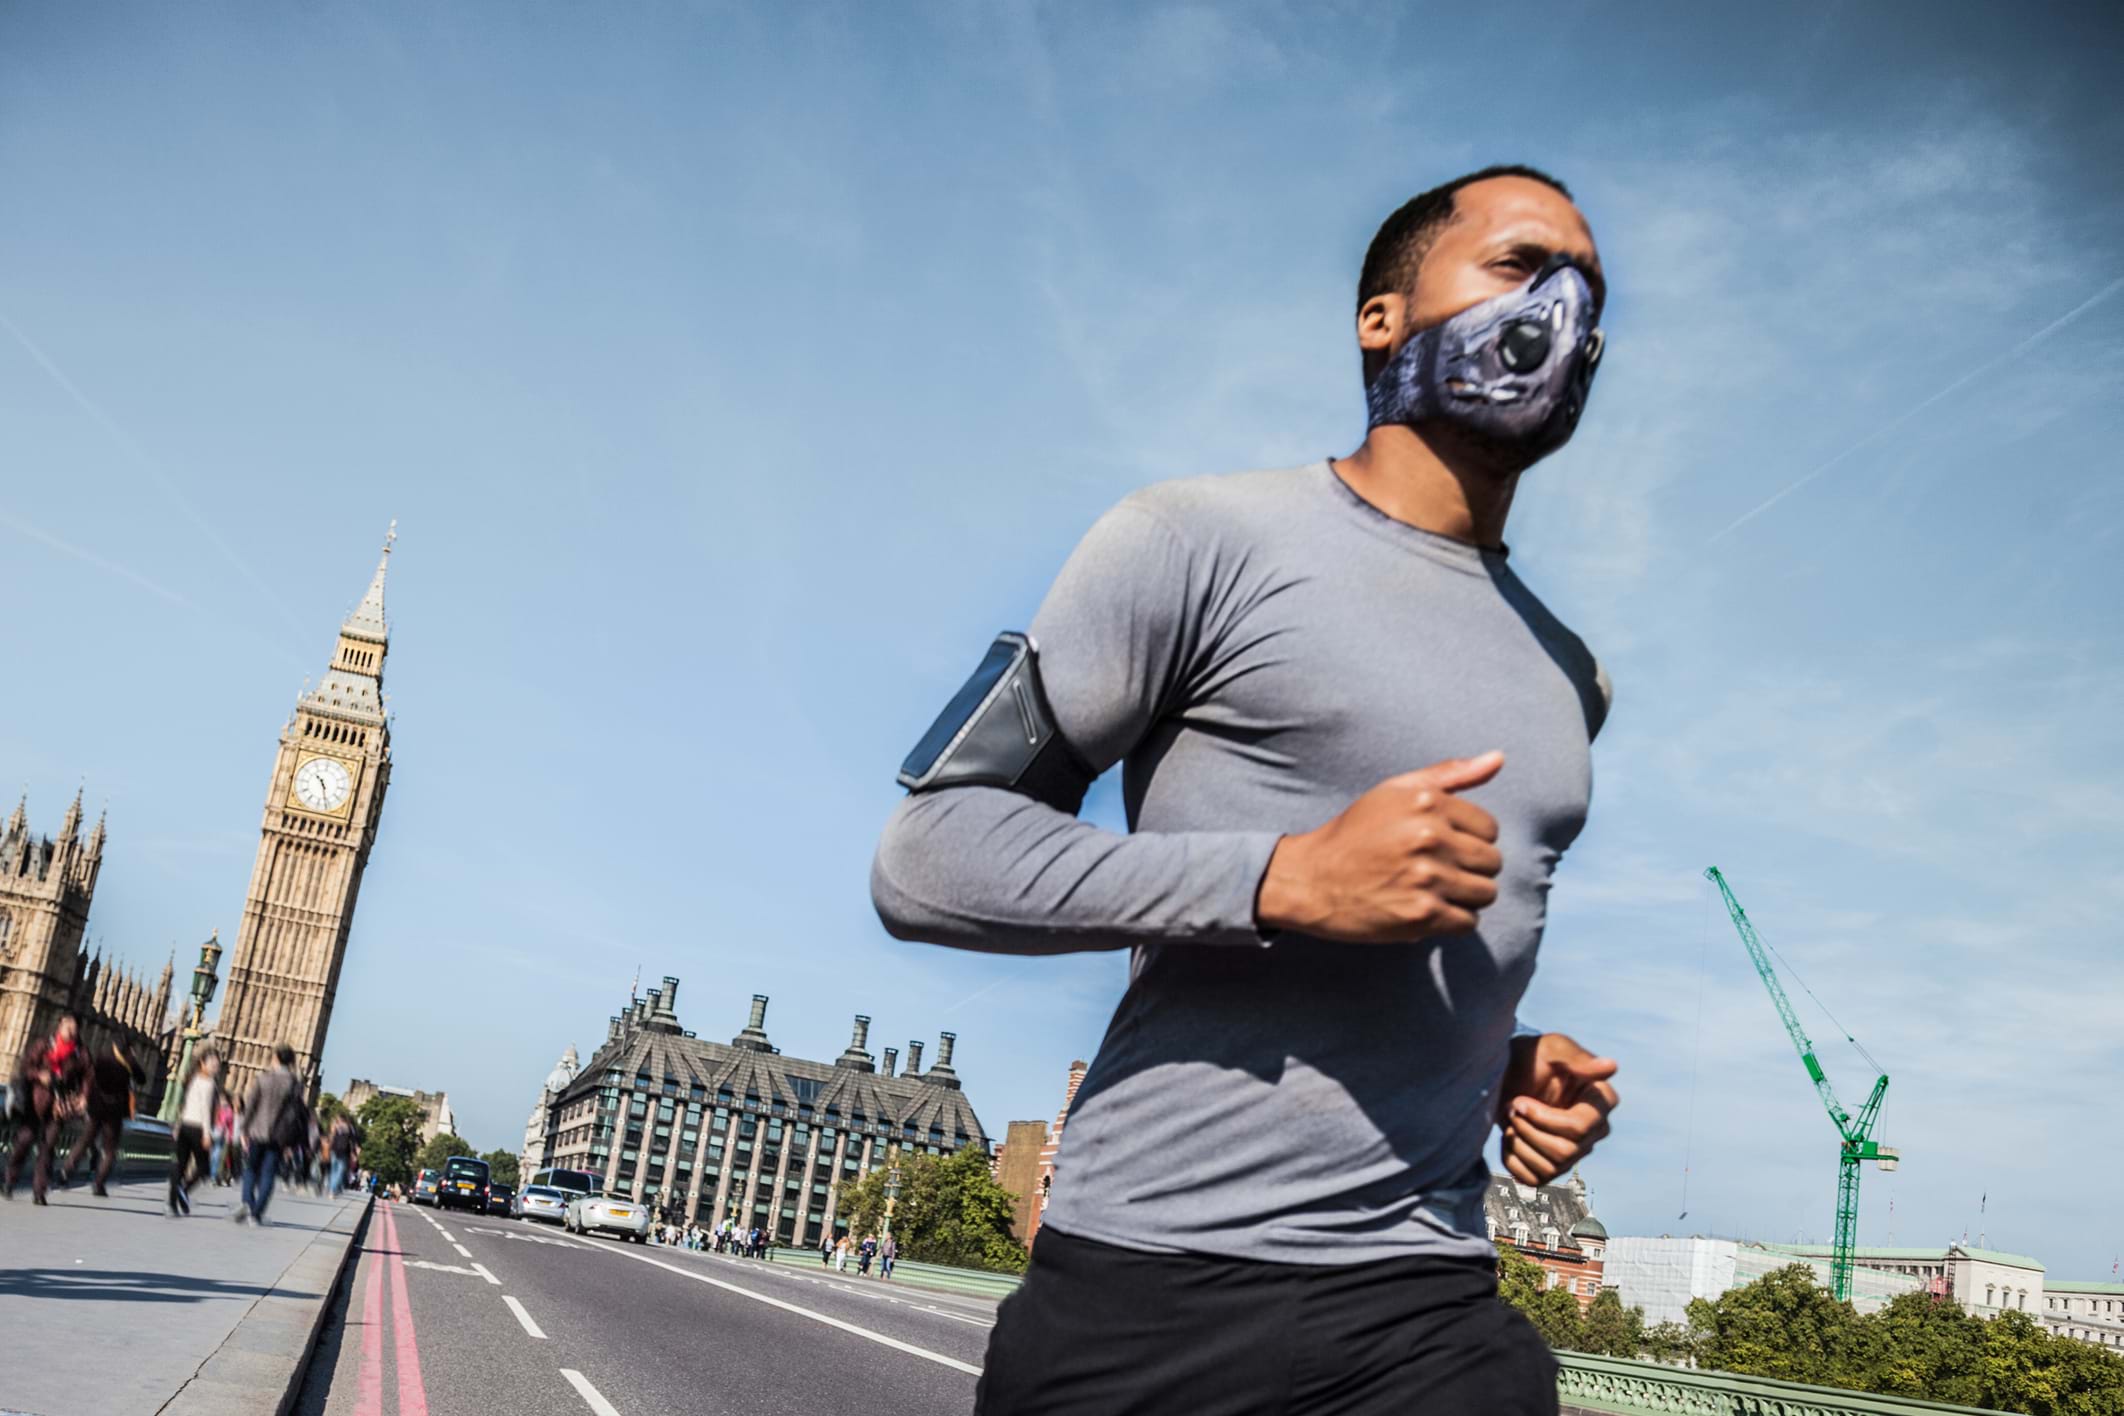 Does air pollution pose a risk for people exercising outside